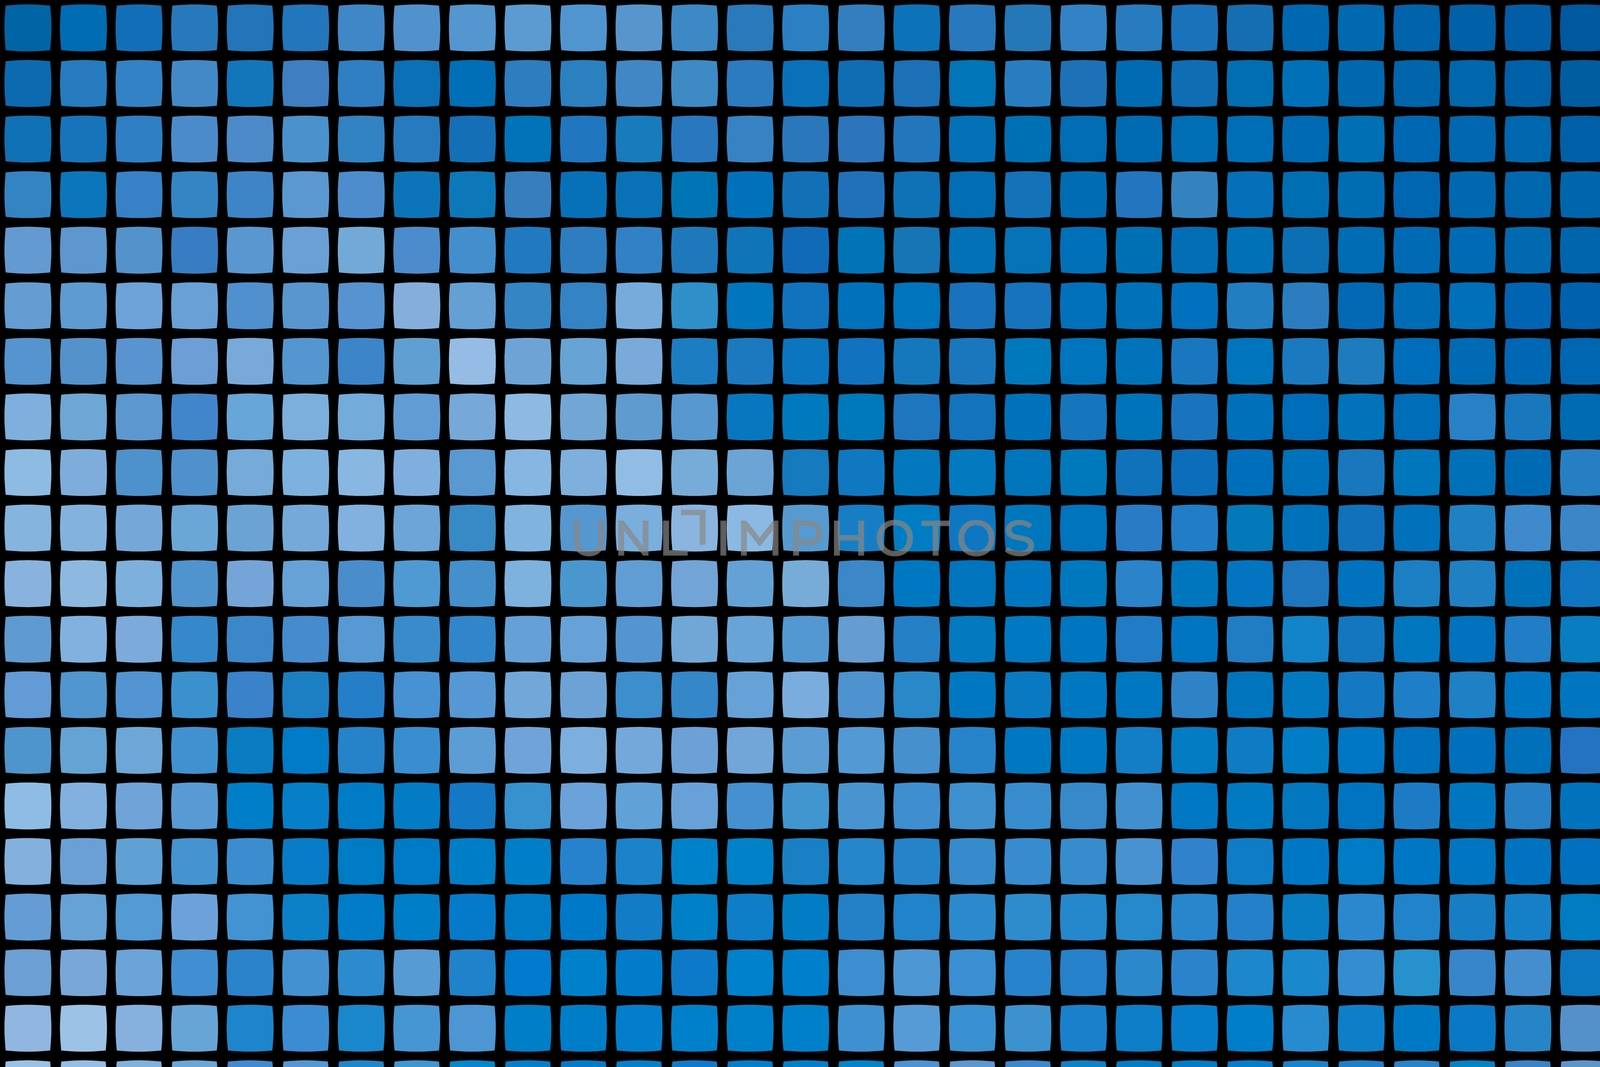 Abstract mosaic blue background with square tiles over black, vertical format. by peerapixs